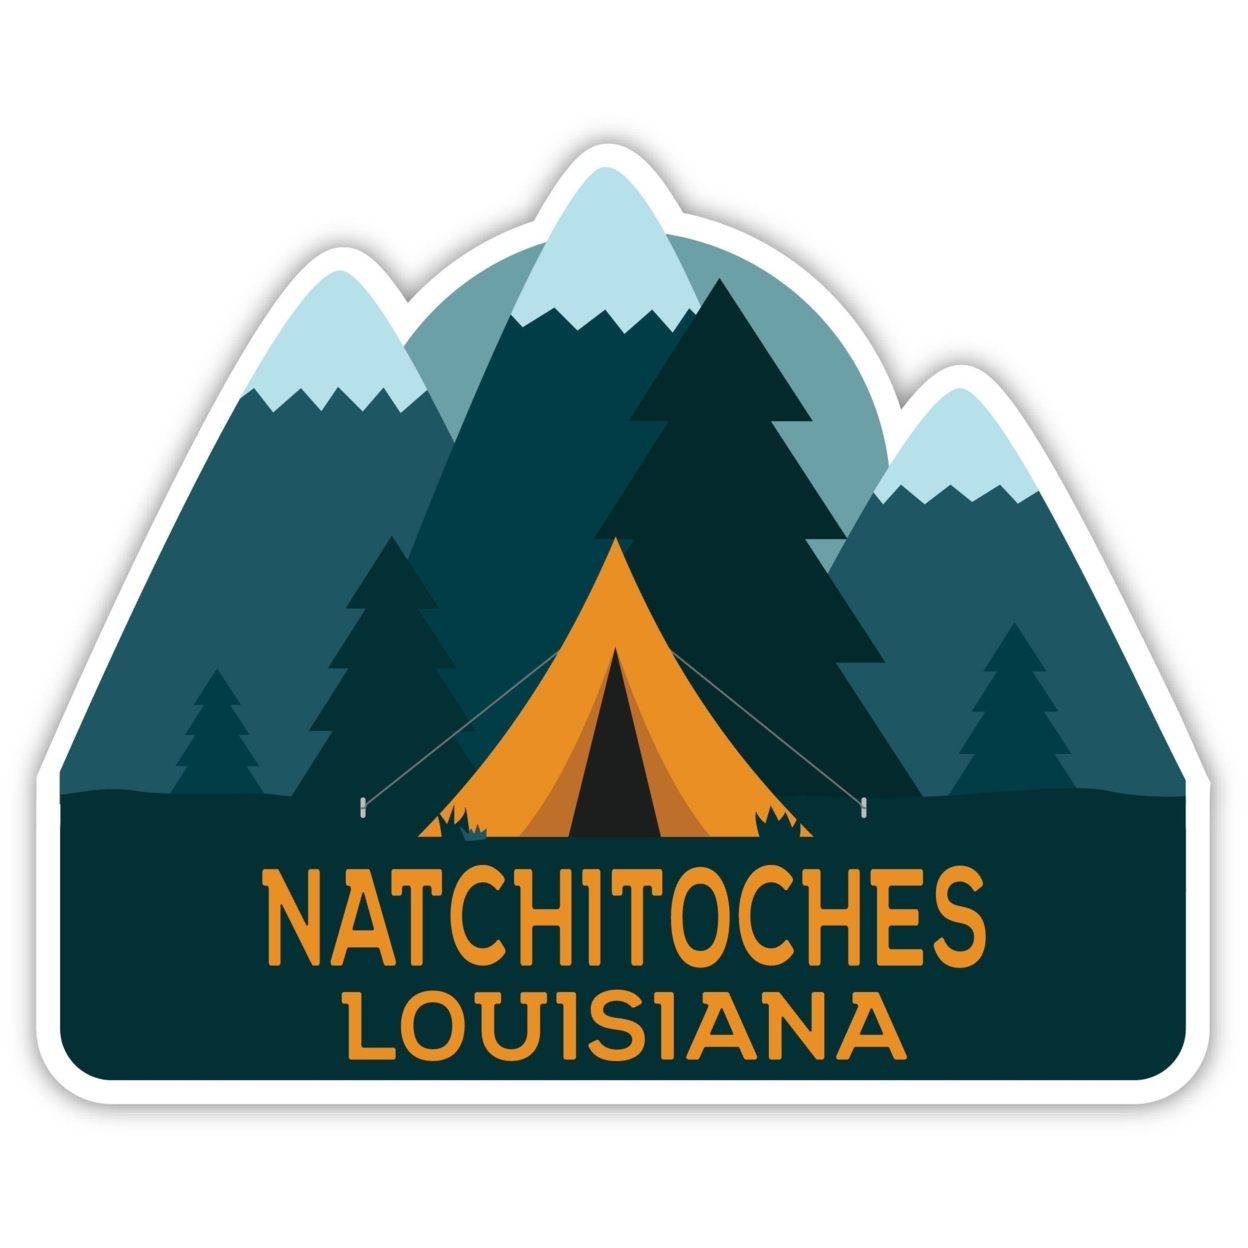 Natchitoches Louisiana Souvenir Decorative Stickers (Choose Theme And Size) - Single Unit, 2-Inch, Adventures Awaits